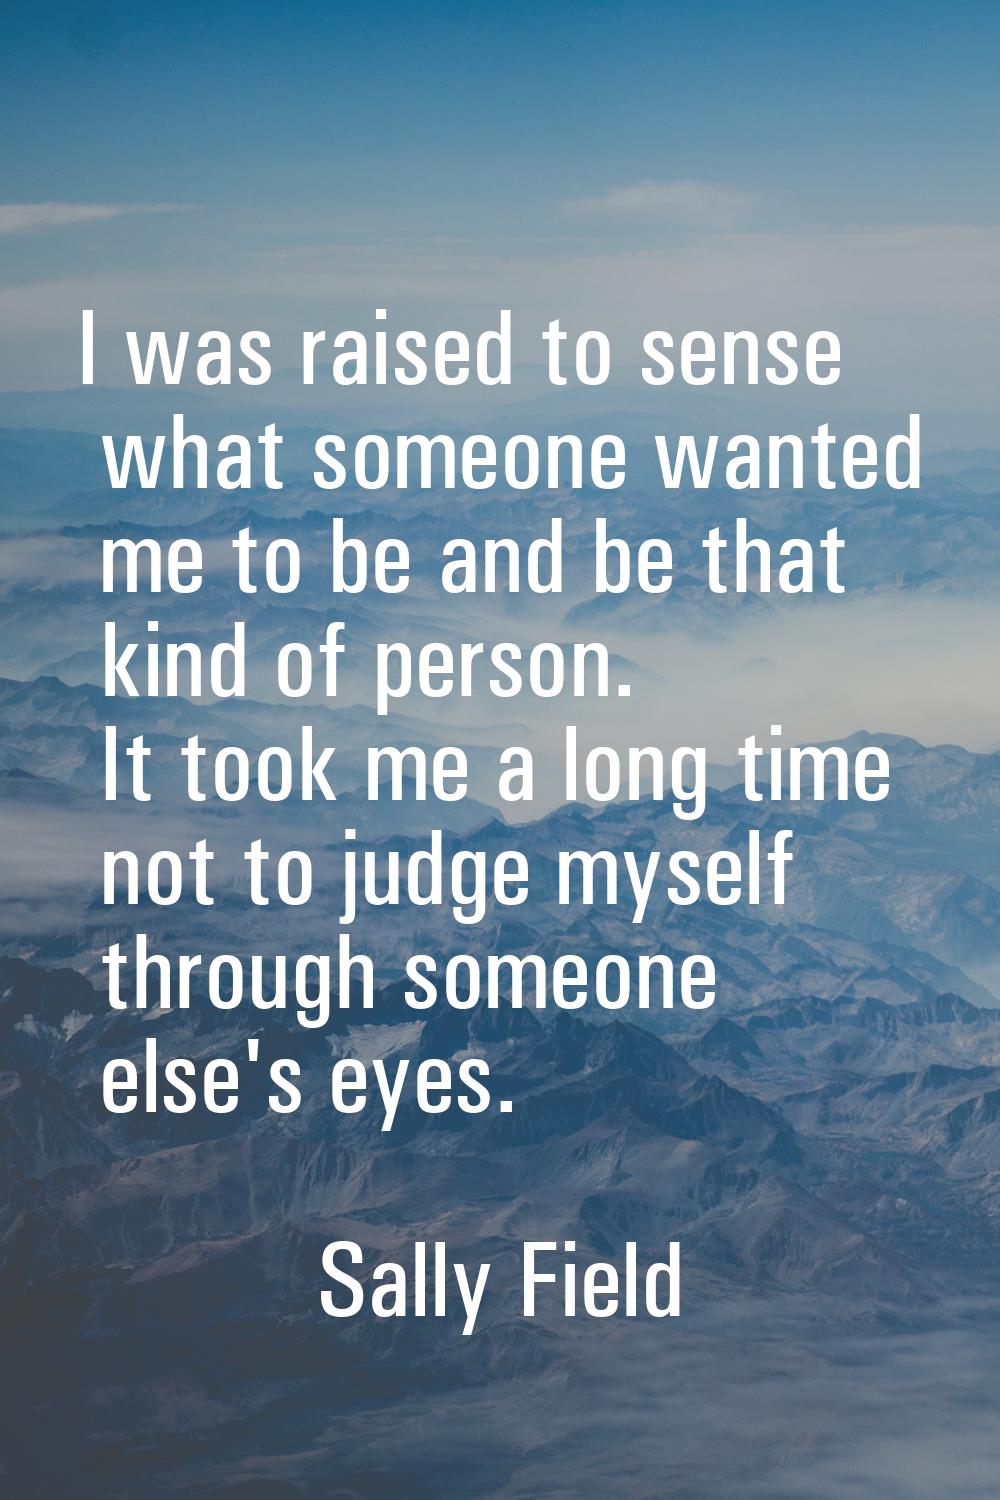 I was raised to sense what someone wanted me to be and be that kind of person. It took me a long ti